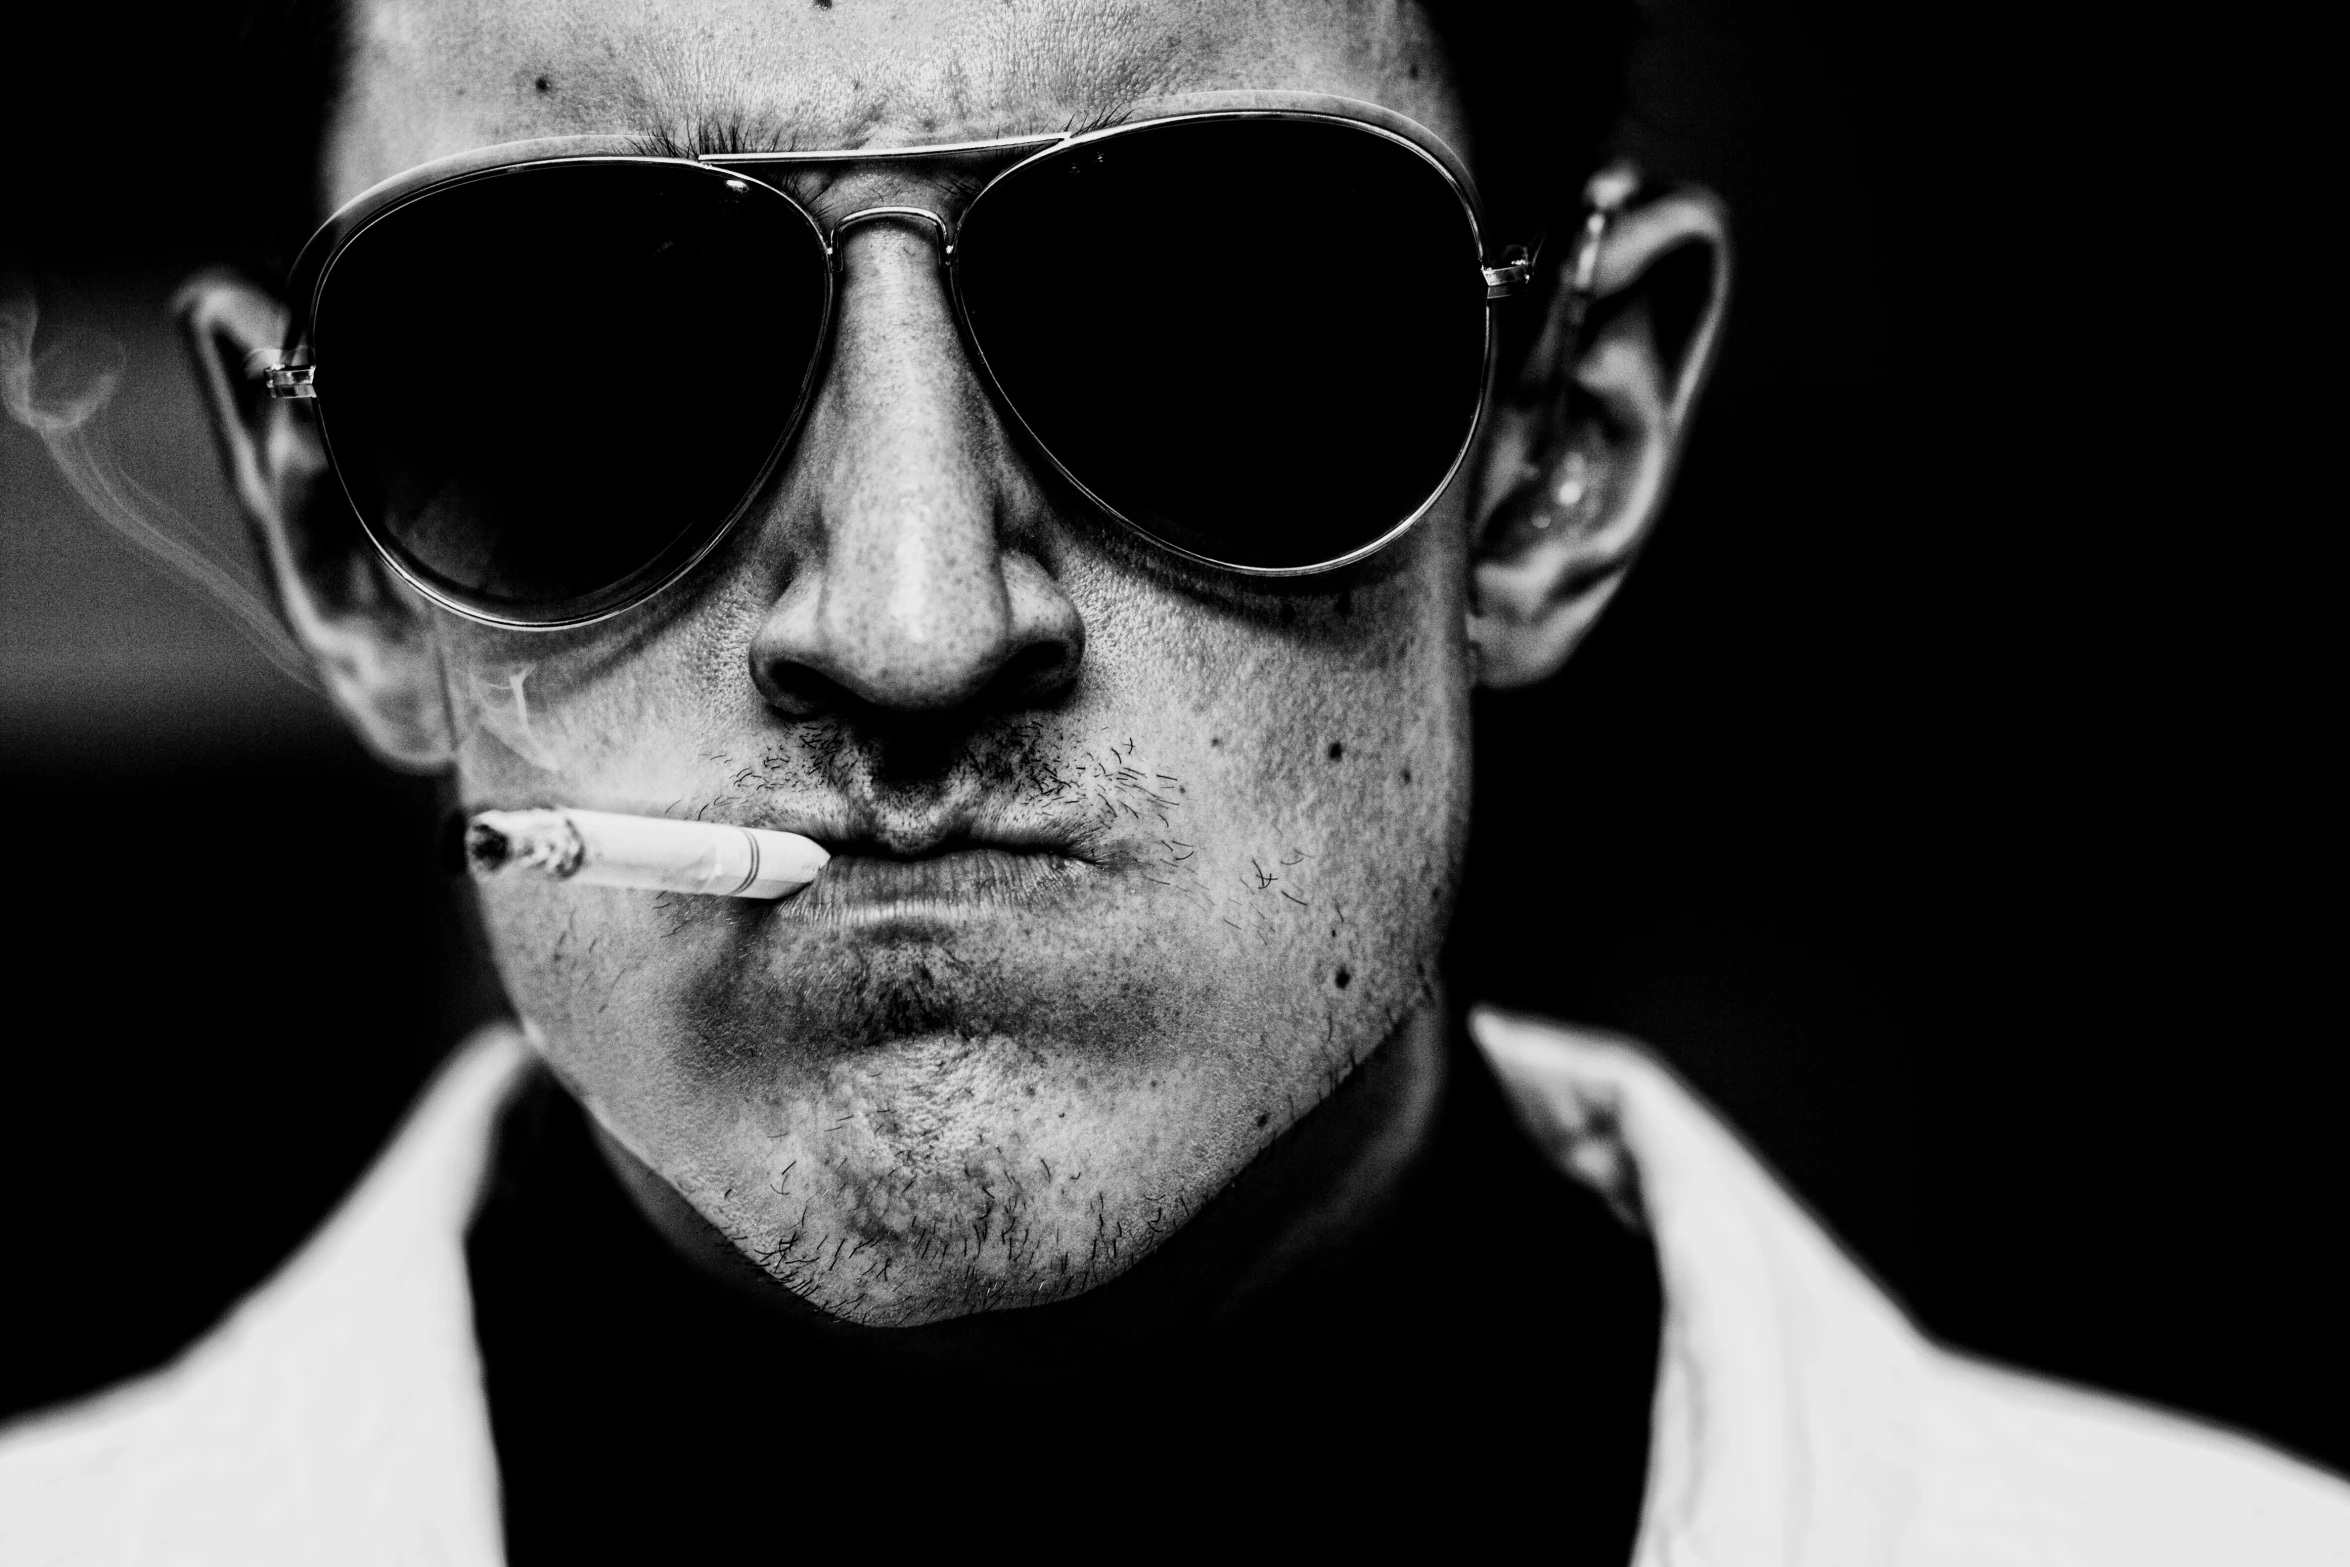 a man wearing a white jacket and dark sunglasses is smoking a cigarette